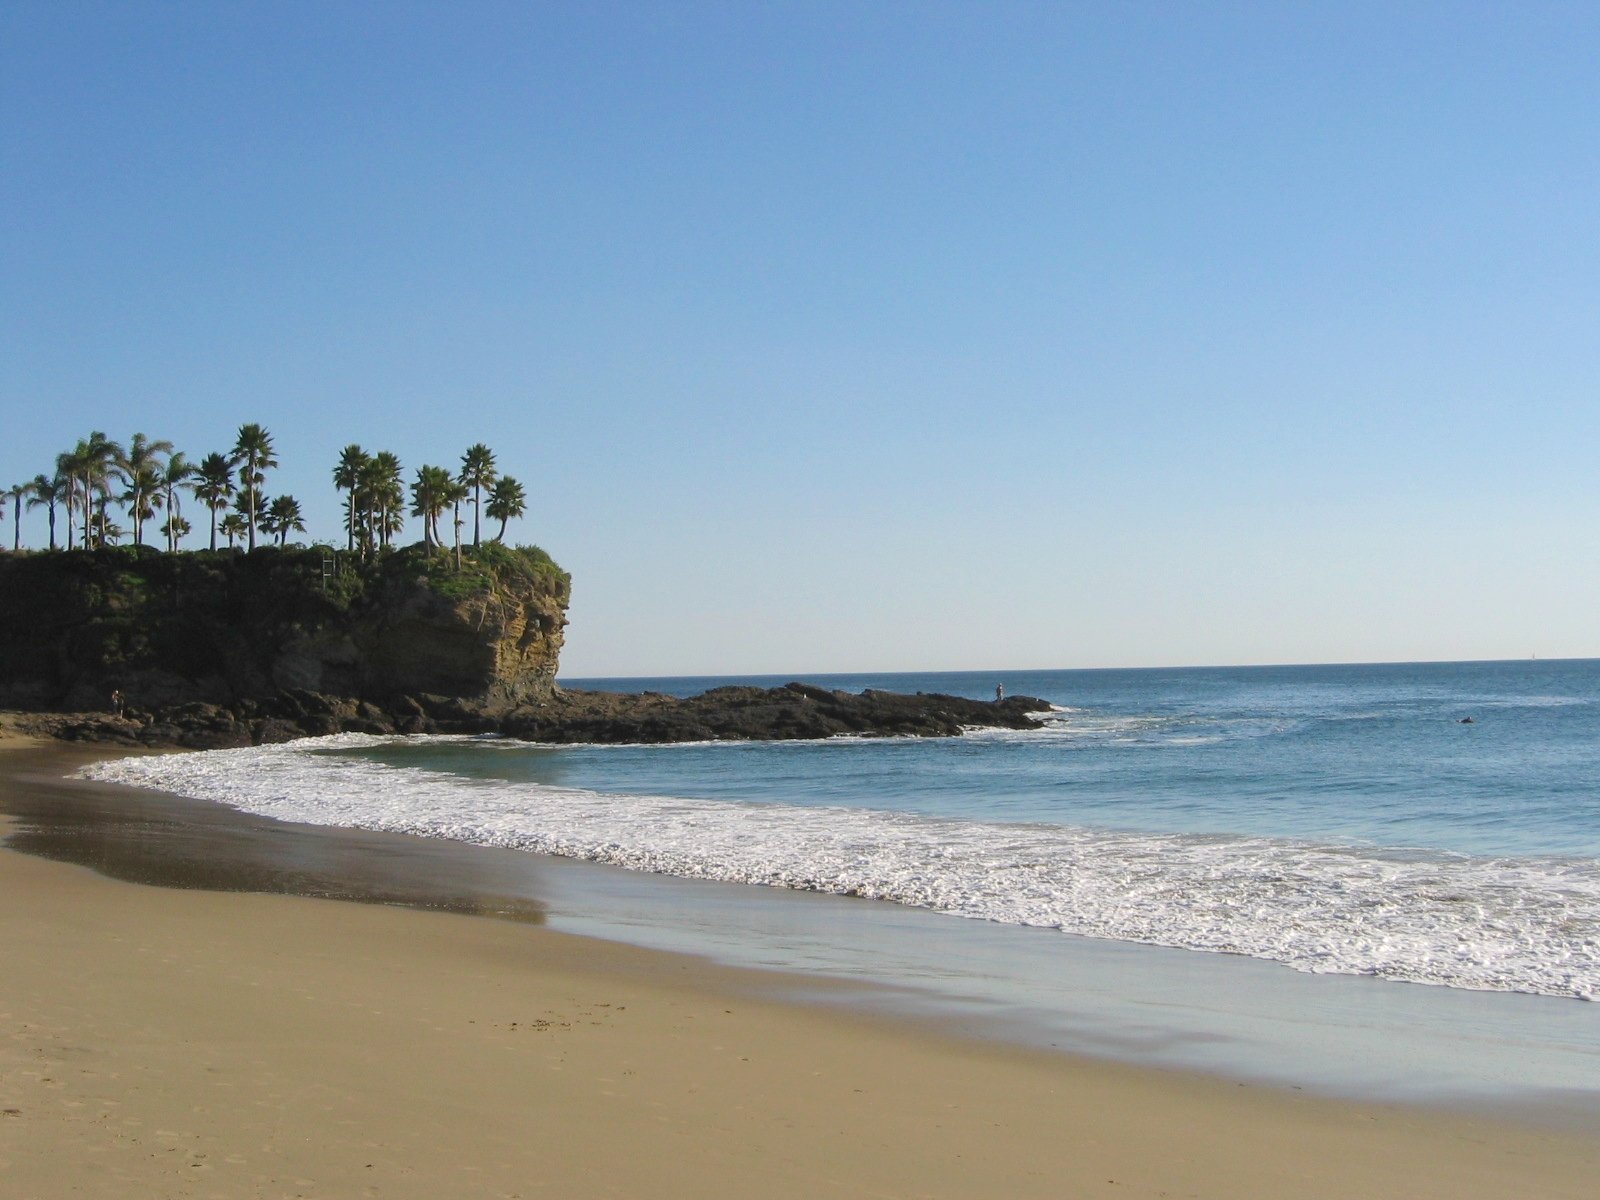 a beach with palm trees and waves crashing to shore